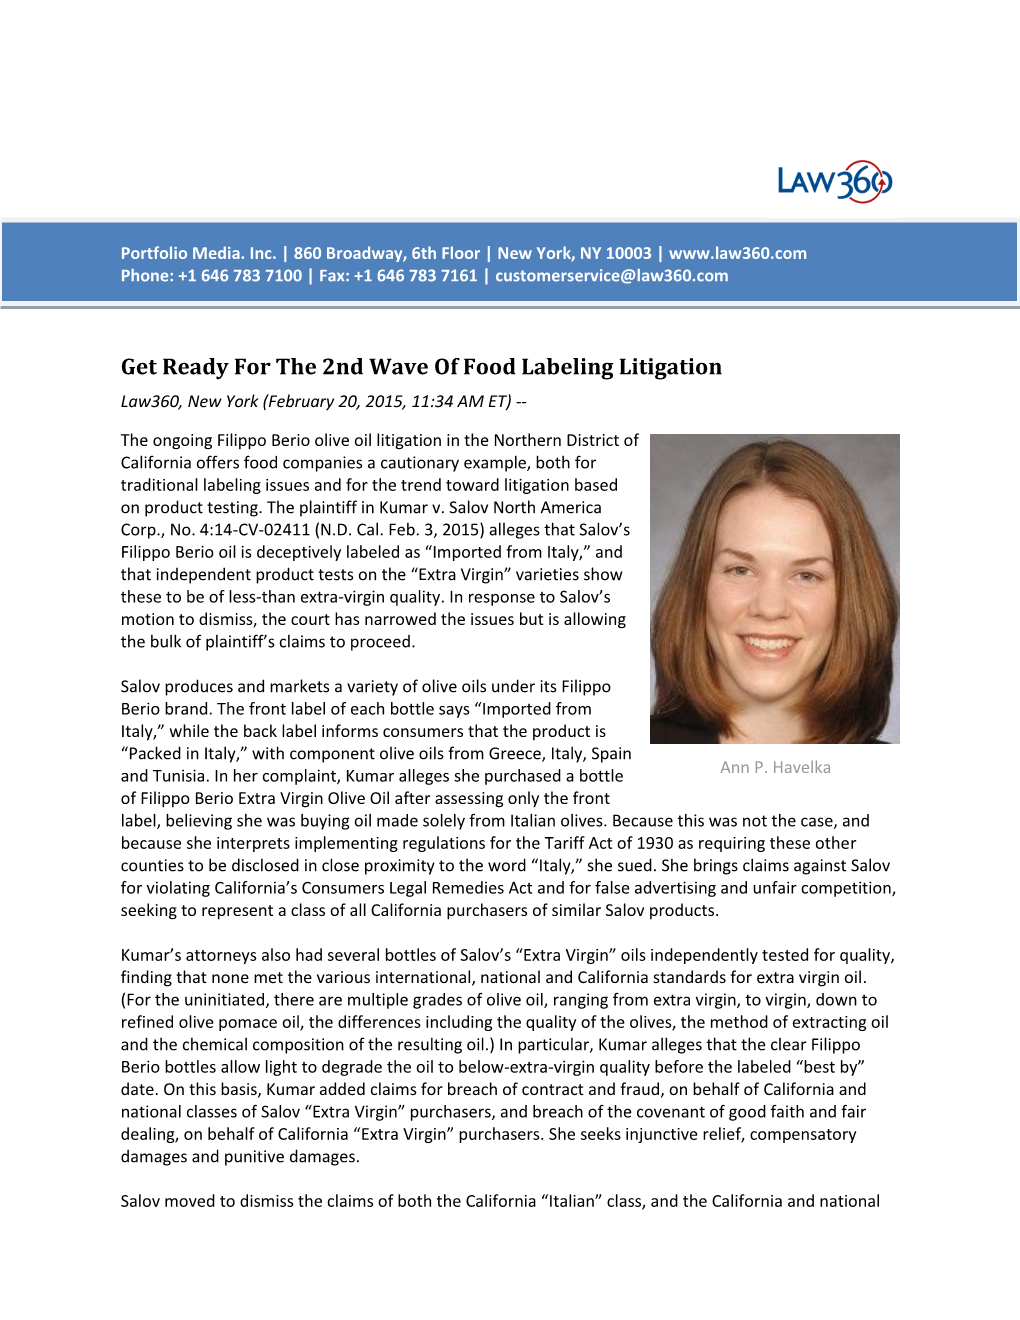 Get Ready for the 2Nd Wave of Food Labeling Litigation Law360, New York (February 20, 2015, 11:34 AM ET)